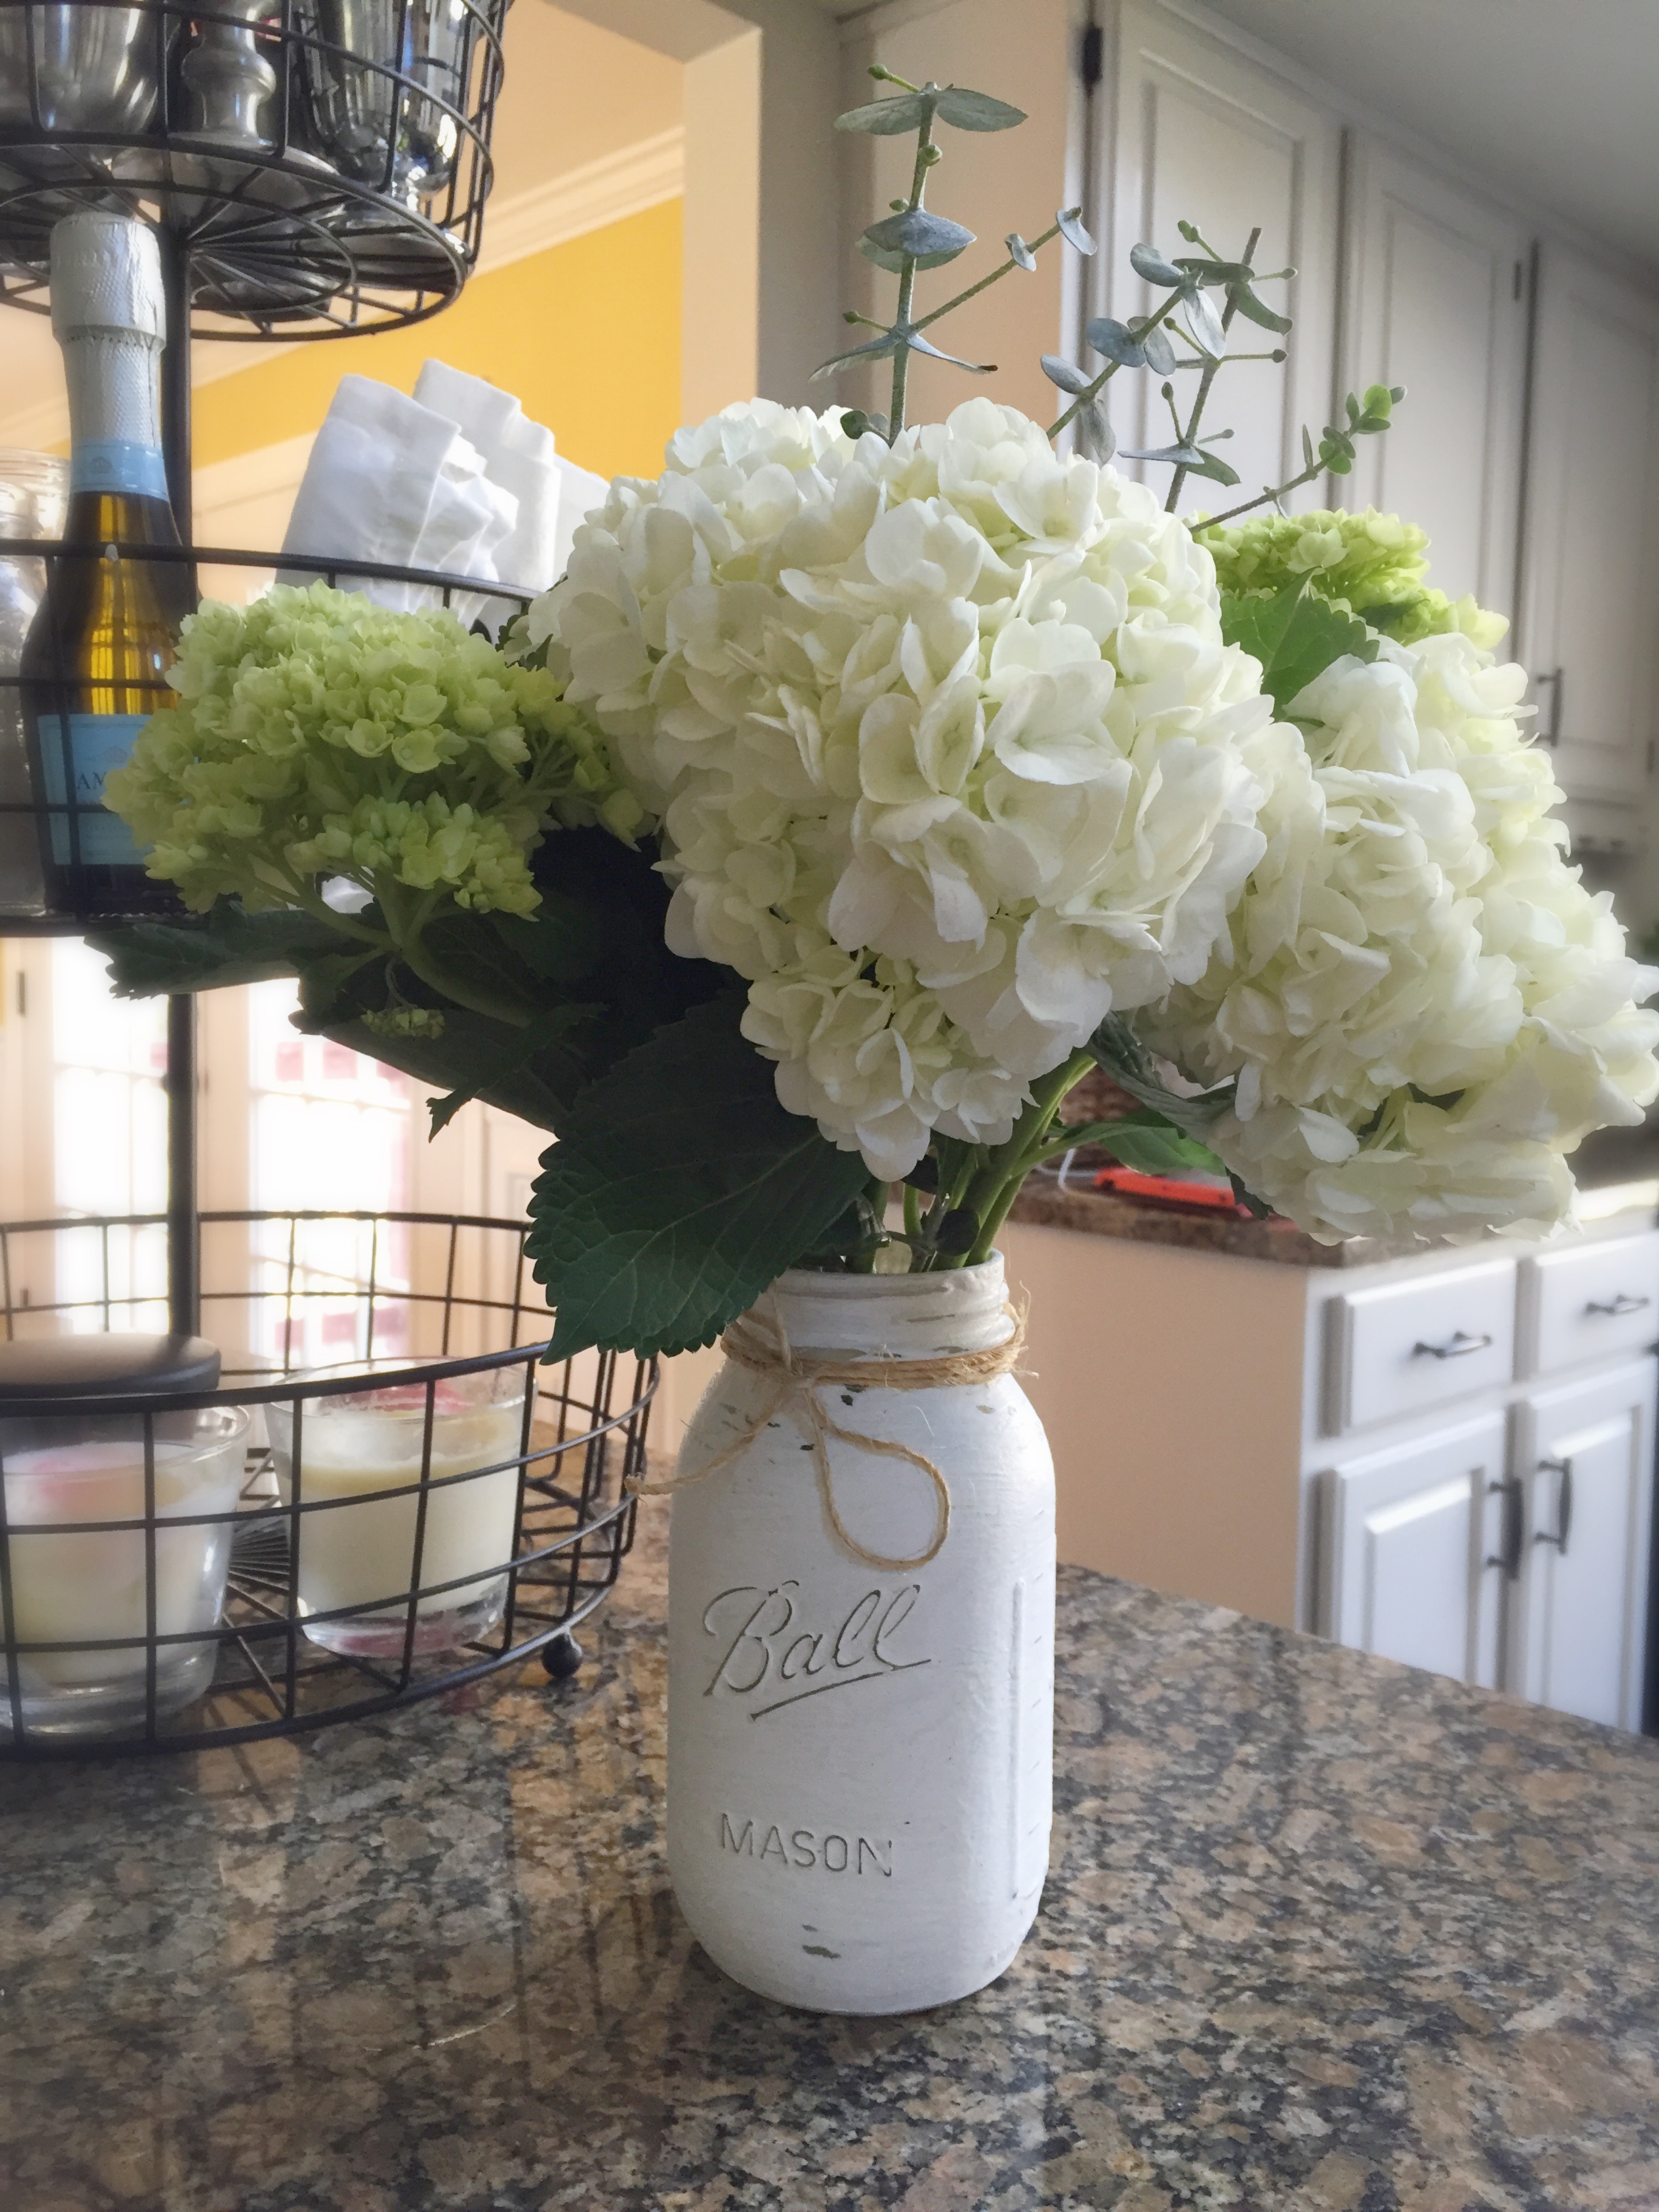 How to paint Mason jars with chalk paint by www.whitecottagehomeandliving.com